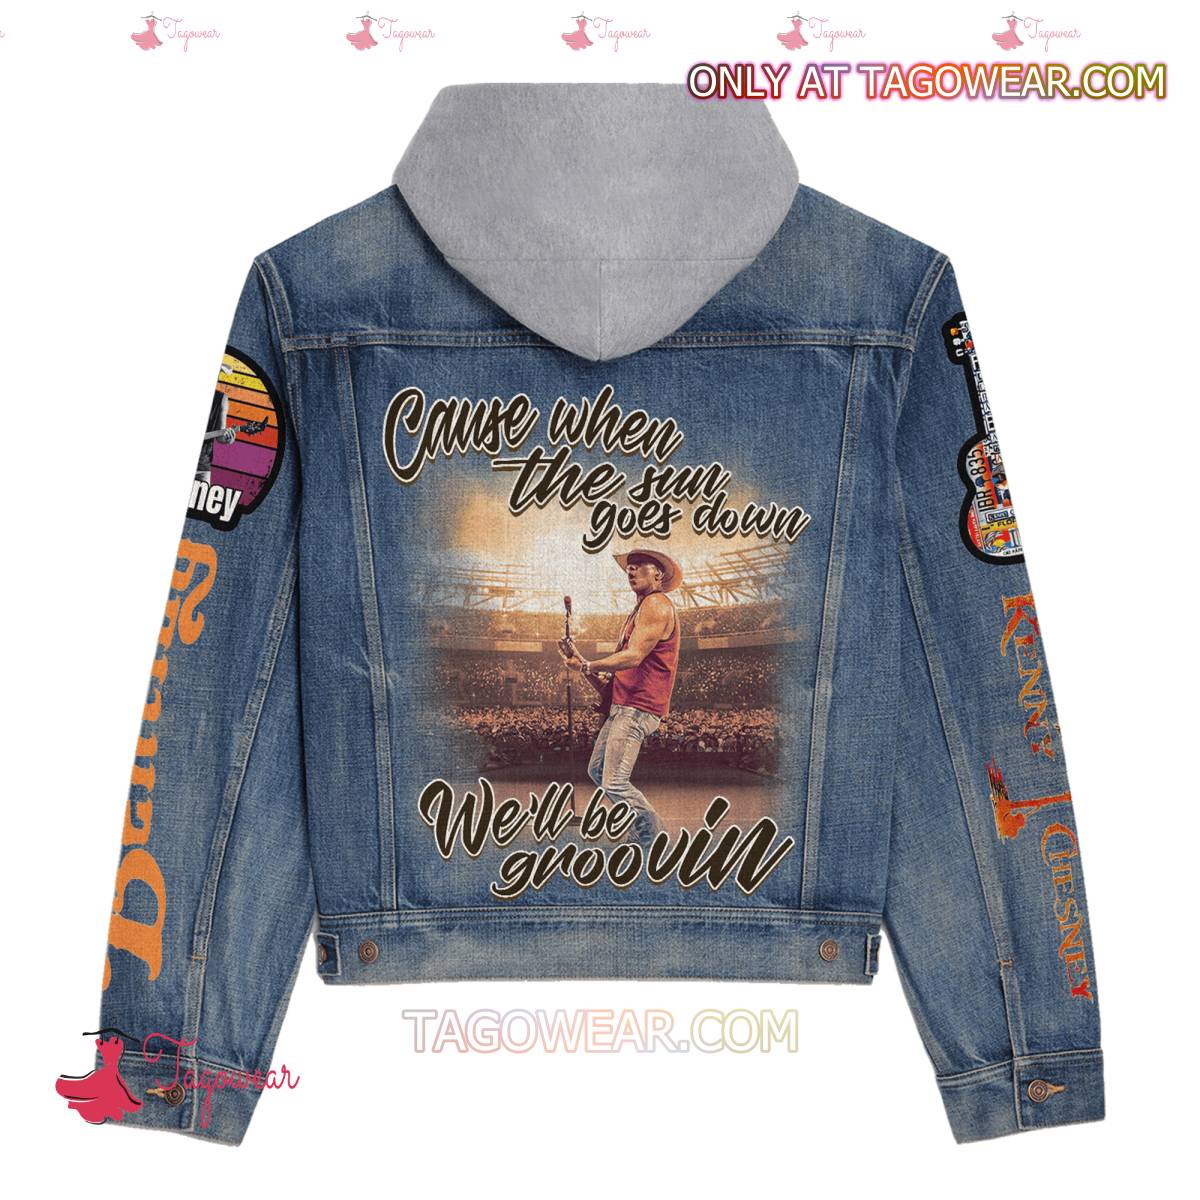 Kenny Chesney Cause When The Sun Goes Down We'll Be Groovin Jean Hoodie Jacket b